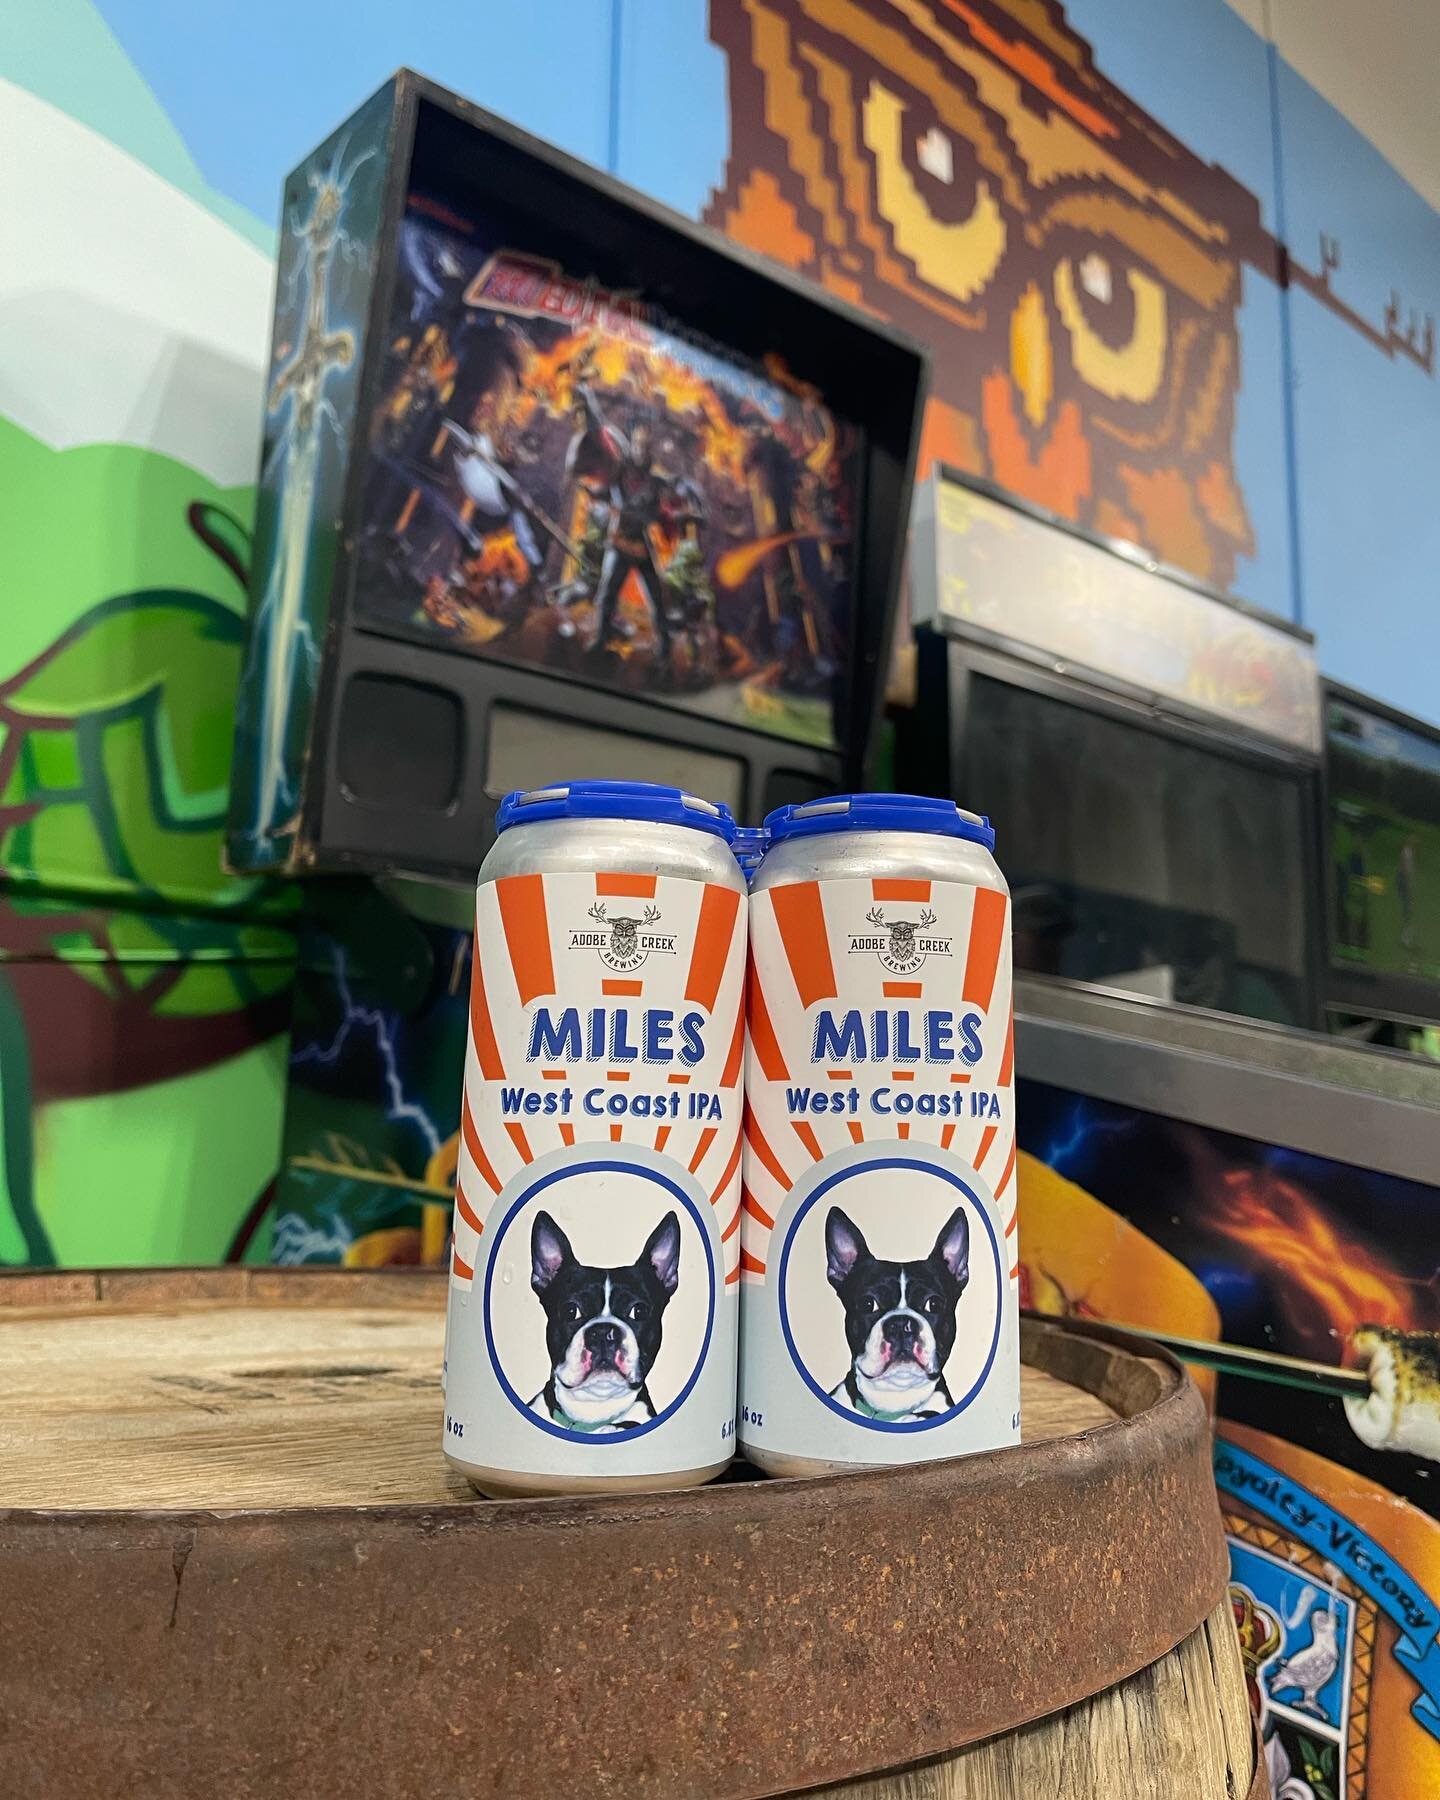 Miles IPA is back in cans and on tap in Novato and Petaluma!  Dry hopped with Nelson Sauvin, Strata, and Mosaic hops!
🍻🦉🦌🦉🍻
#sonoma #marin #craftbeer